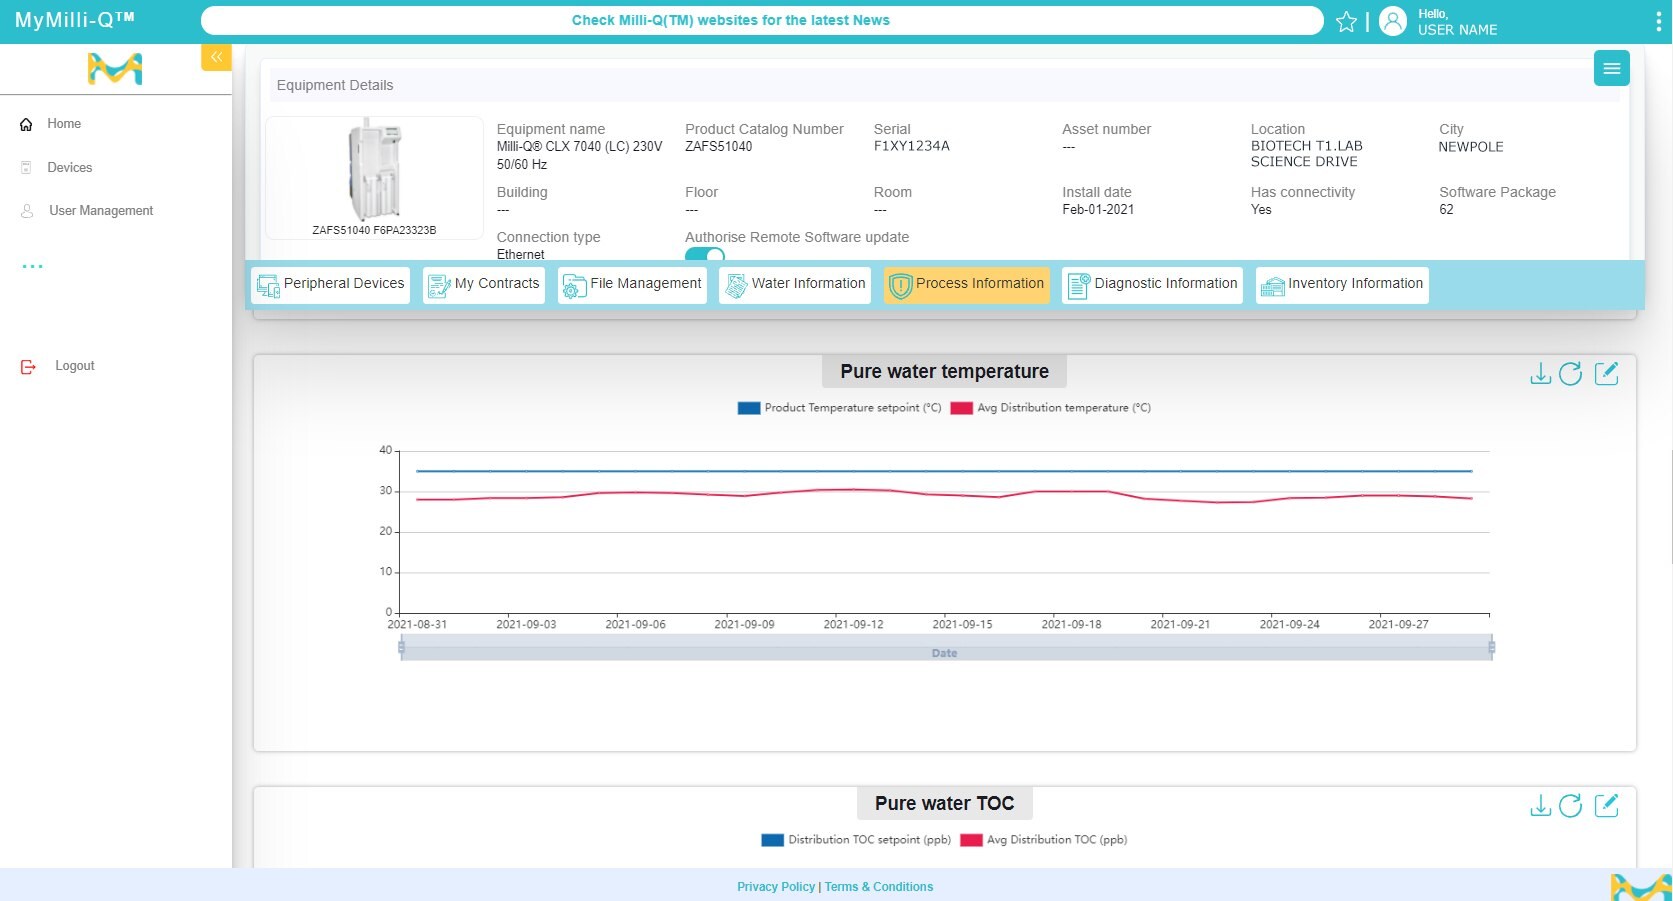 Screen shot of MyMilli-Q™ Remote Care quality monitoring dashboard